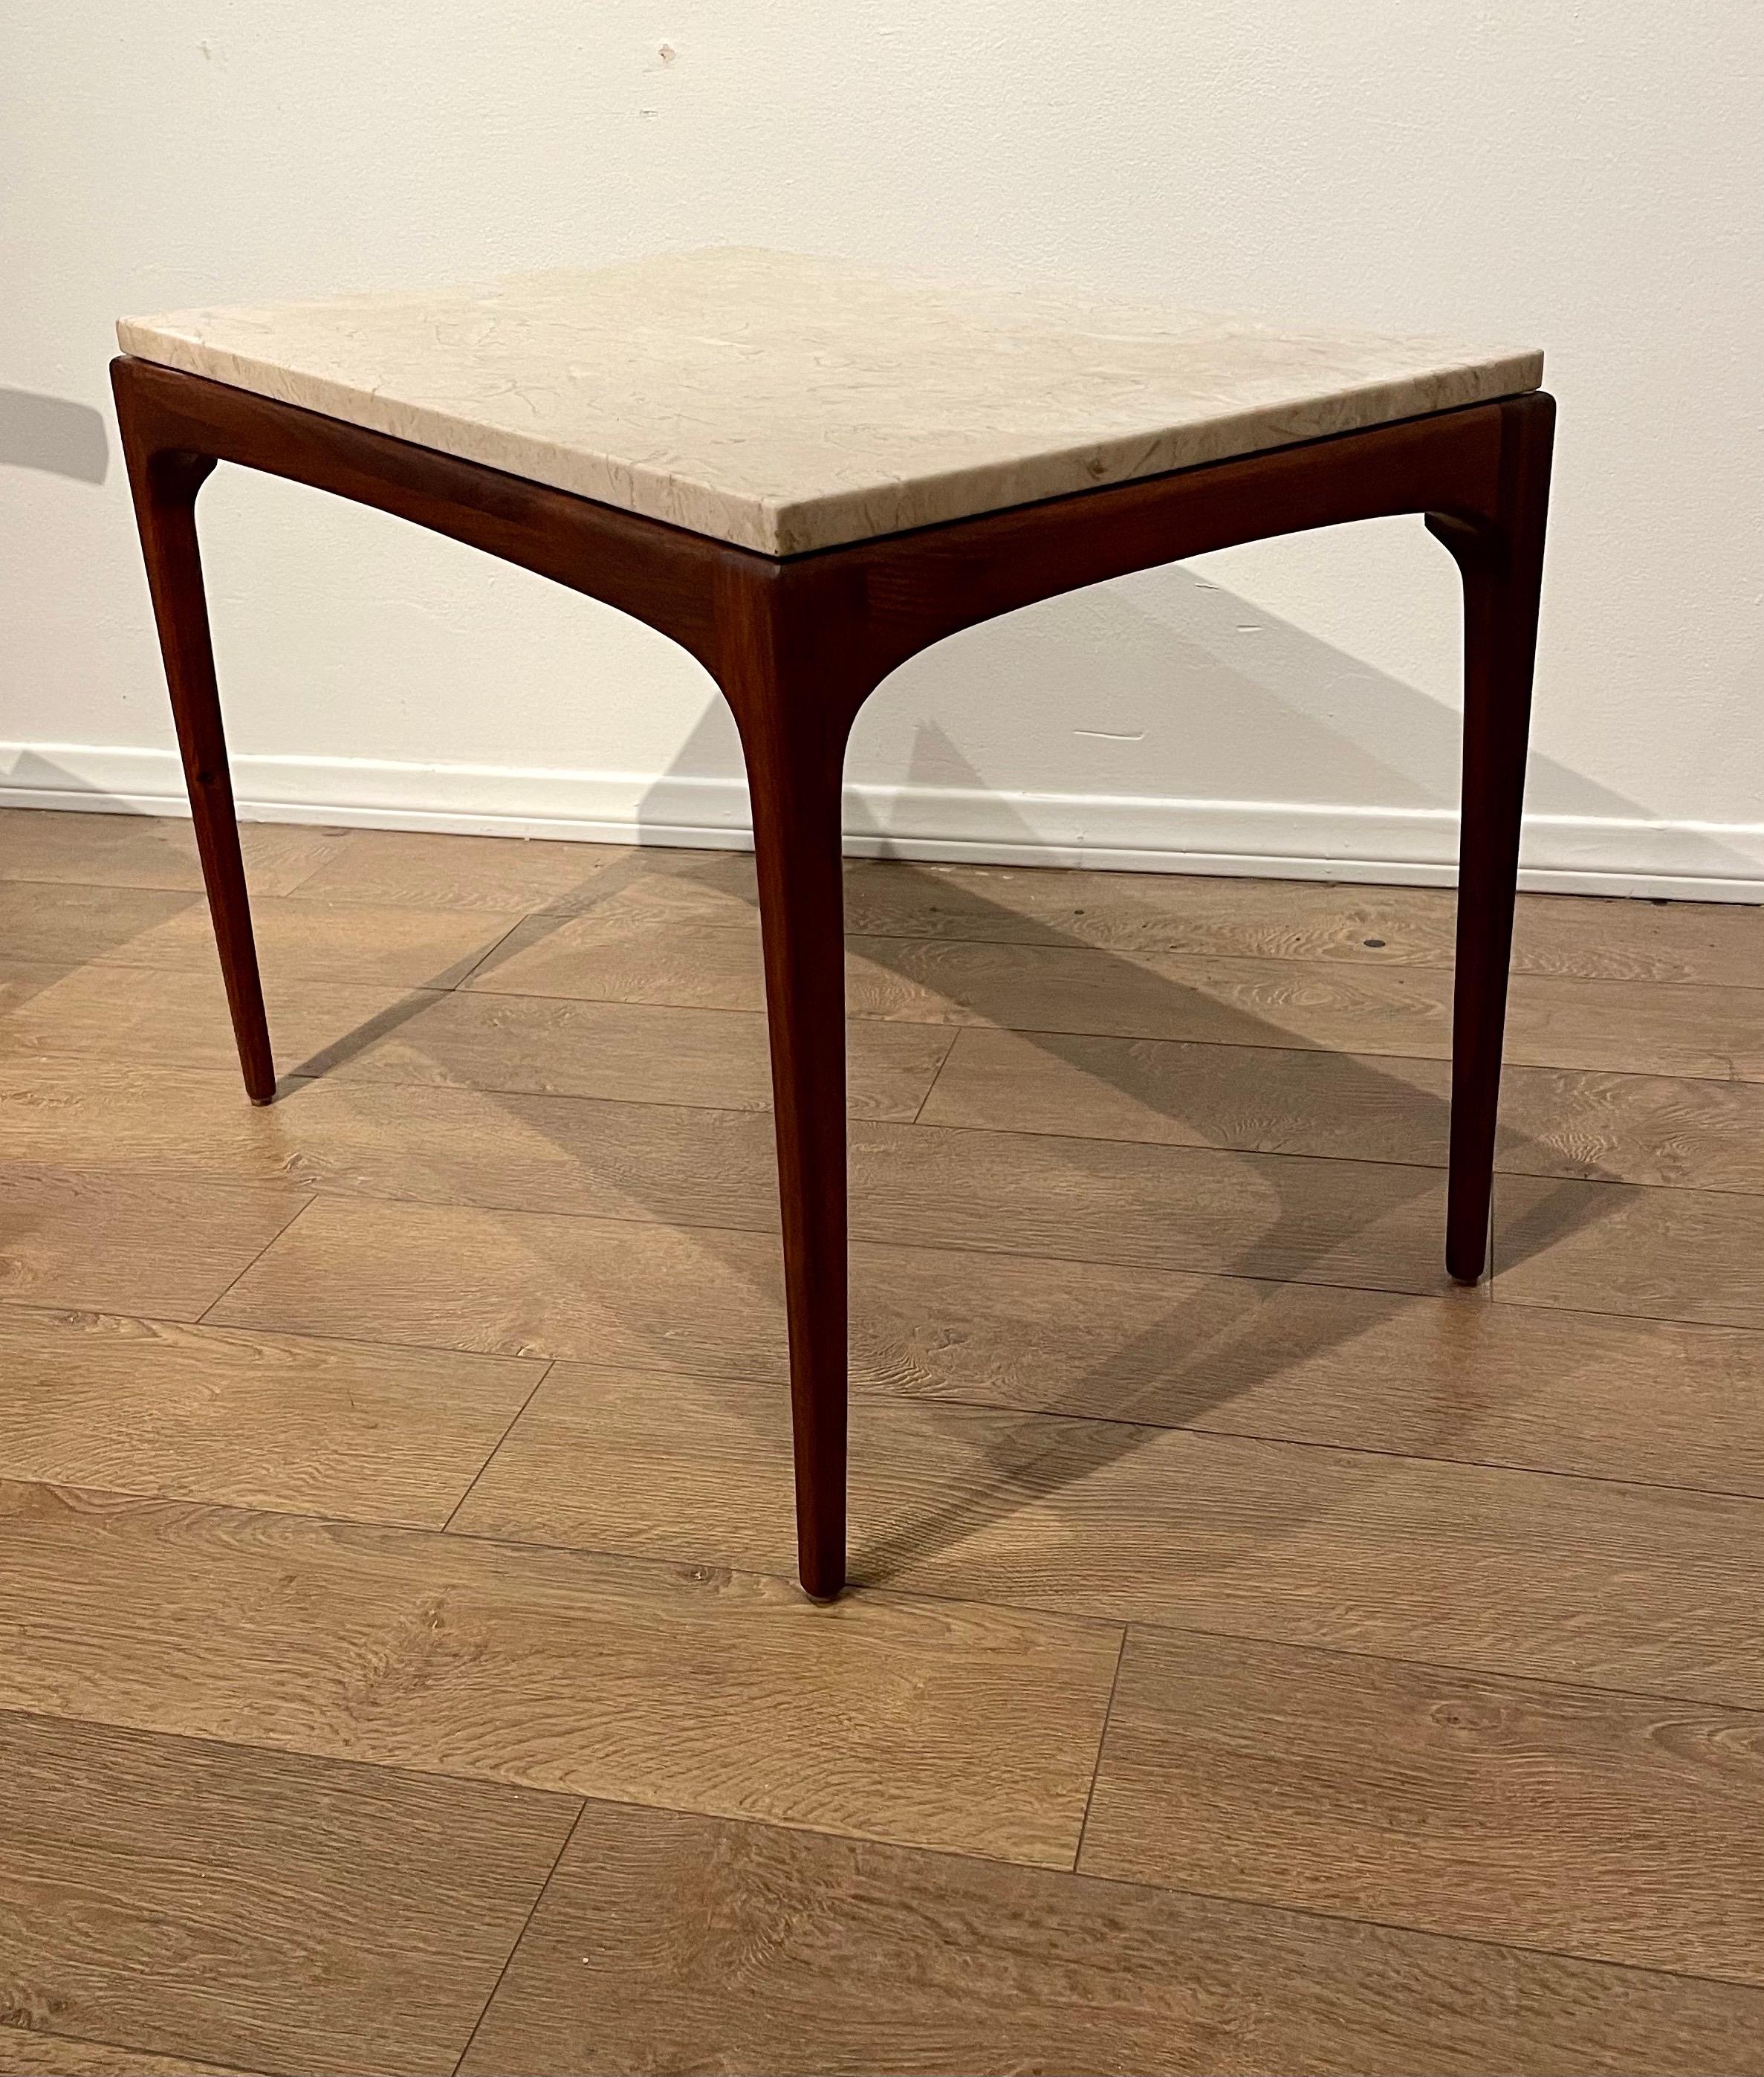 A beautiful an elegant marble and walnut end tables, circa 1960's Solid American walnut frames with Italian Carrera marble tops.